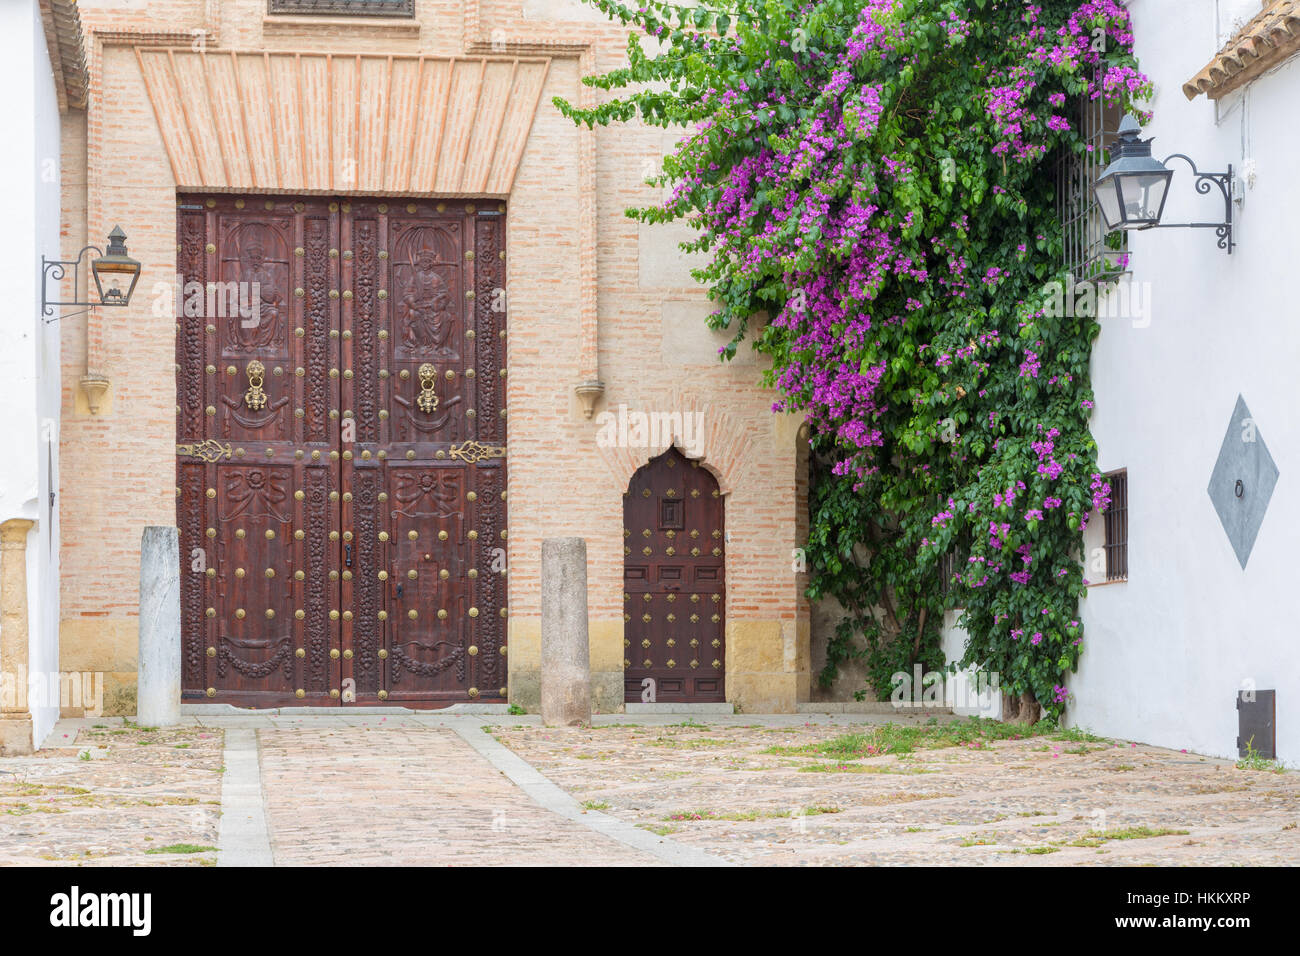 CORDOBA, SPAIN - MAY 26, 2015:  House facade and carved gate from Plaza del Jeronimo Paez square. Stock Photo